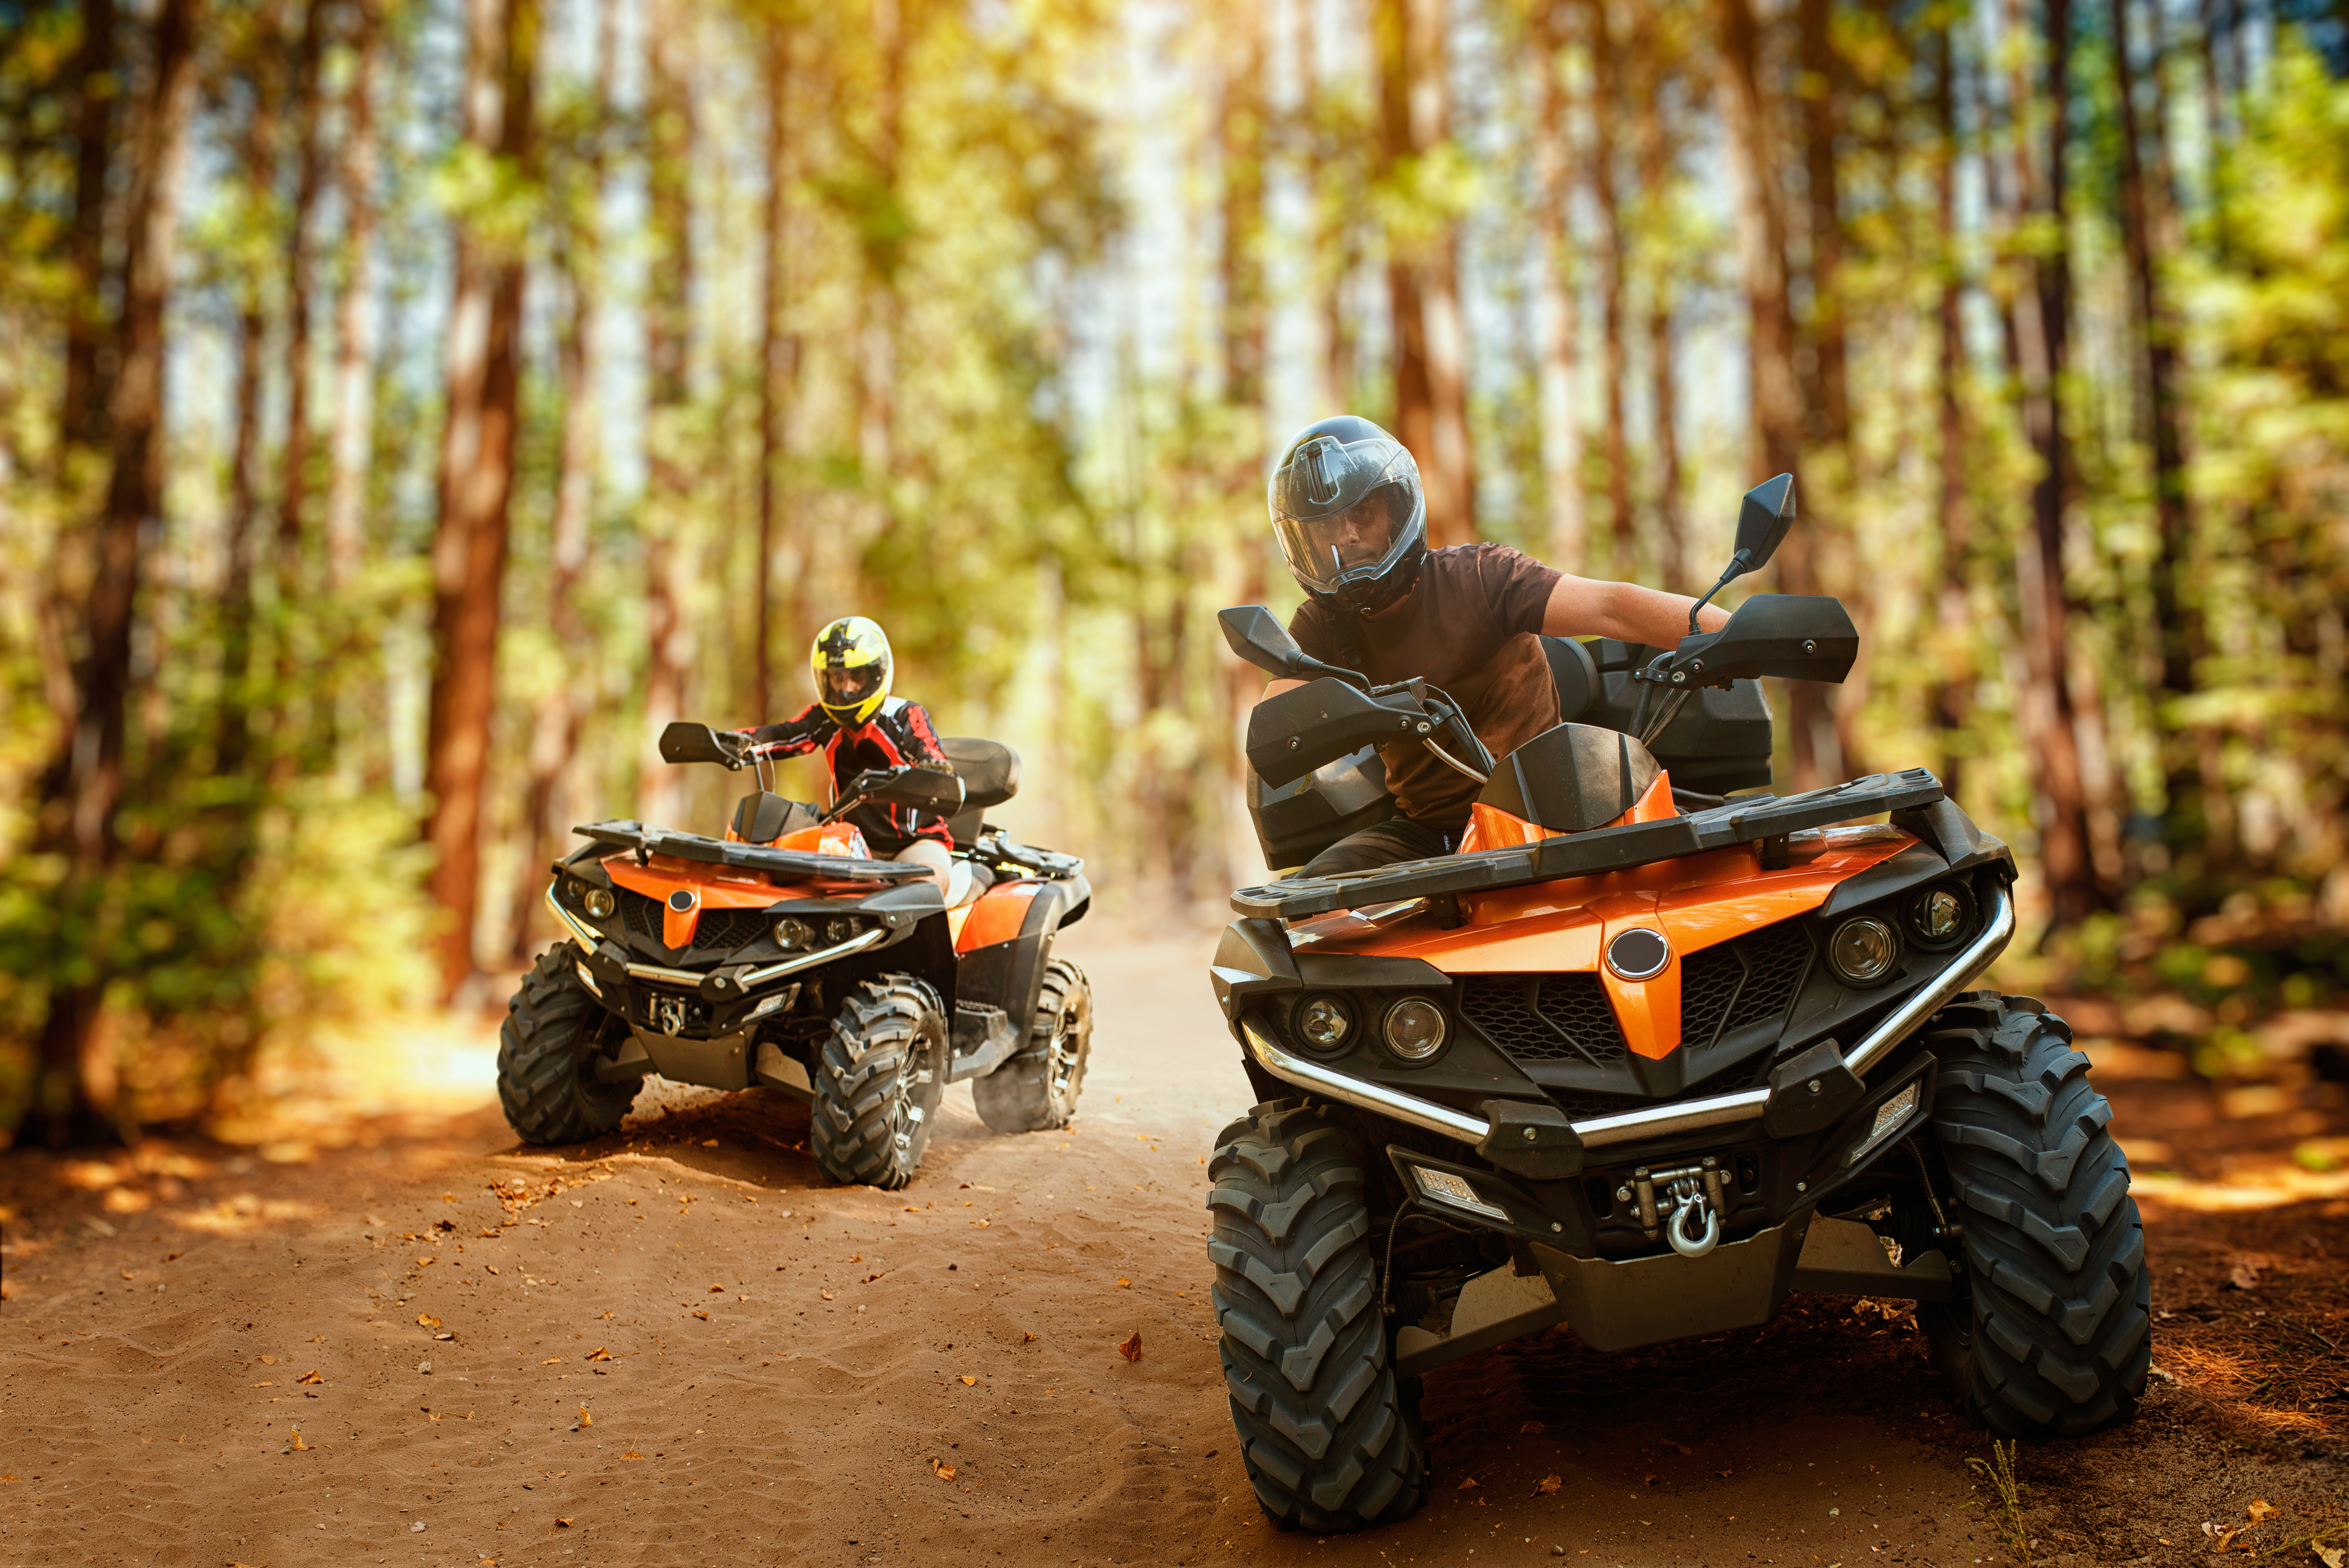 Two ATV riding a trail in the woods